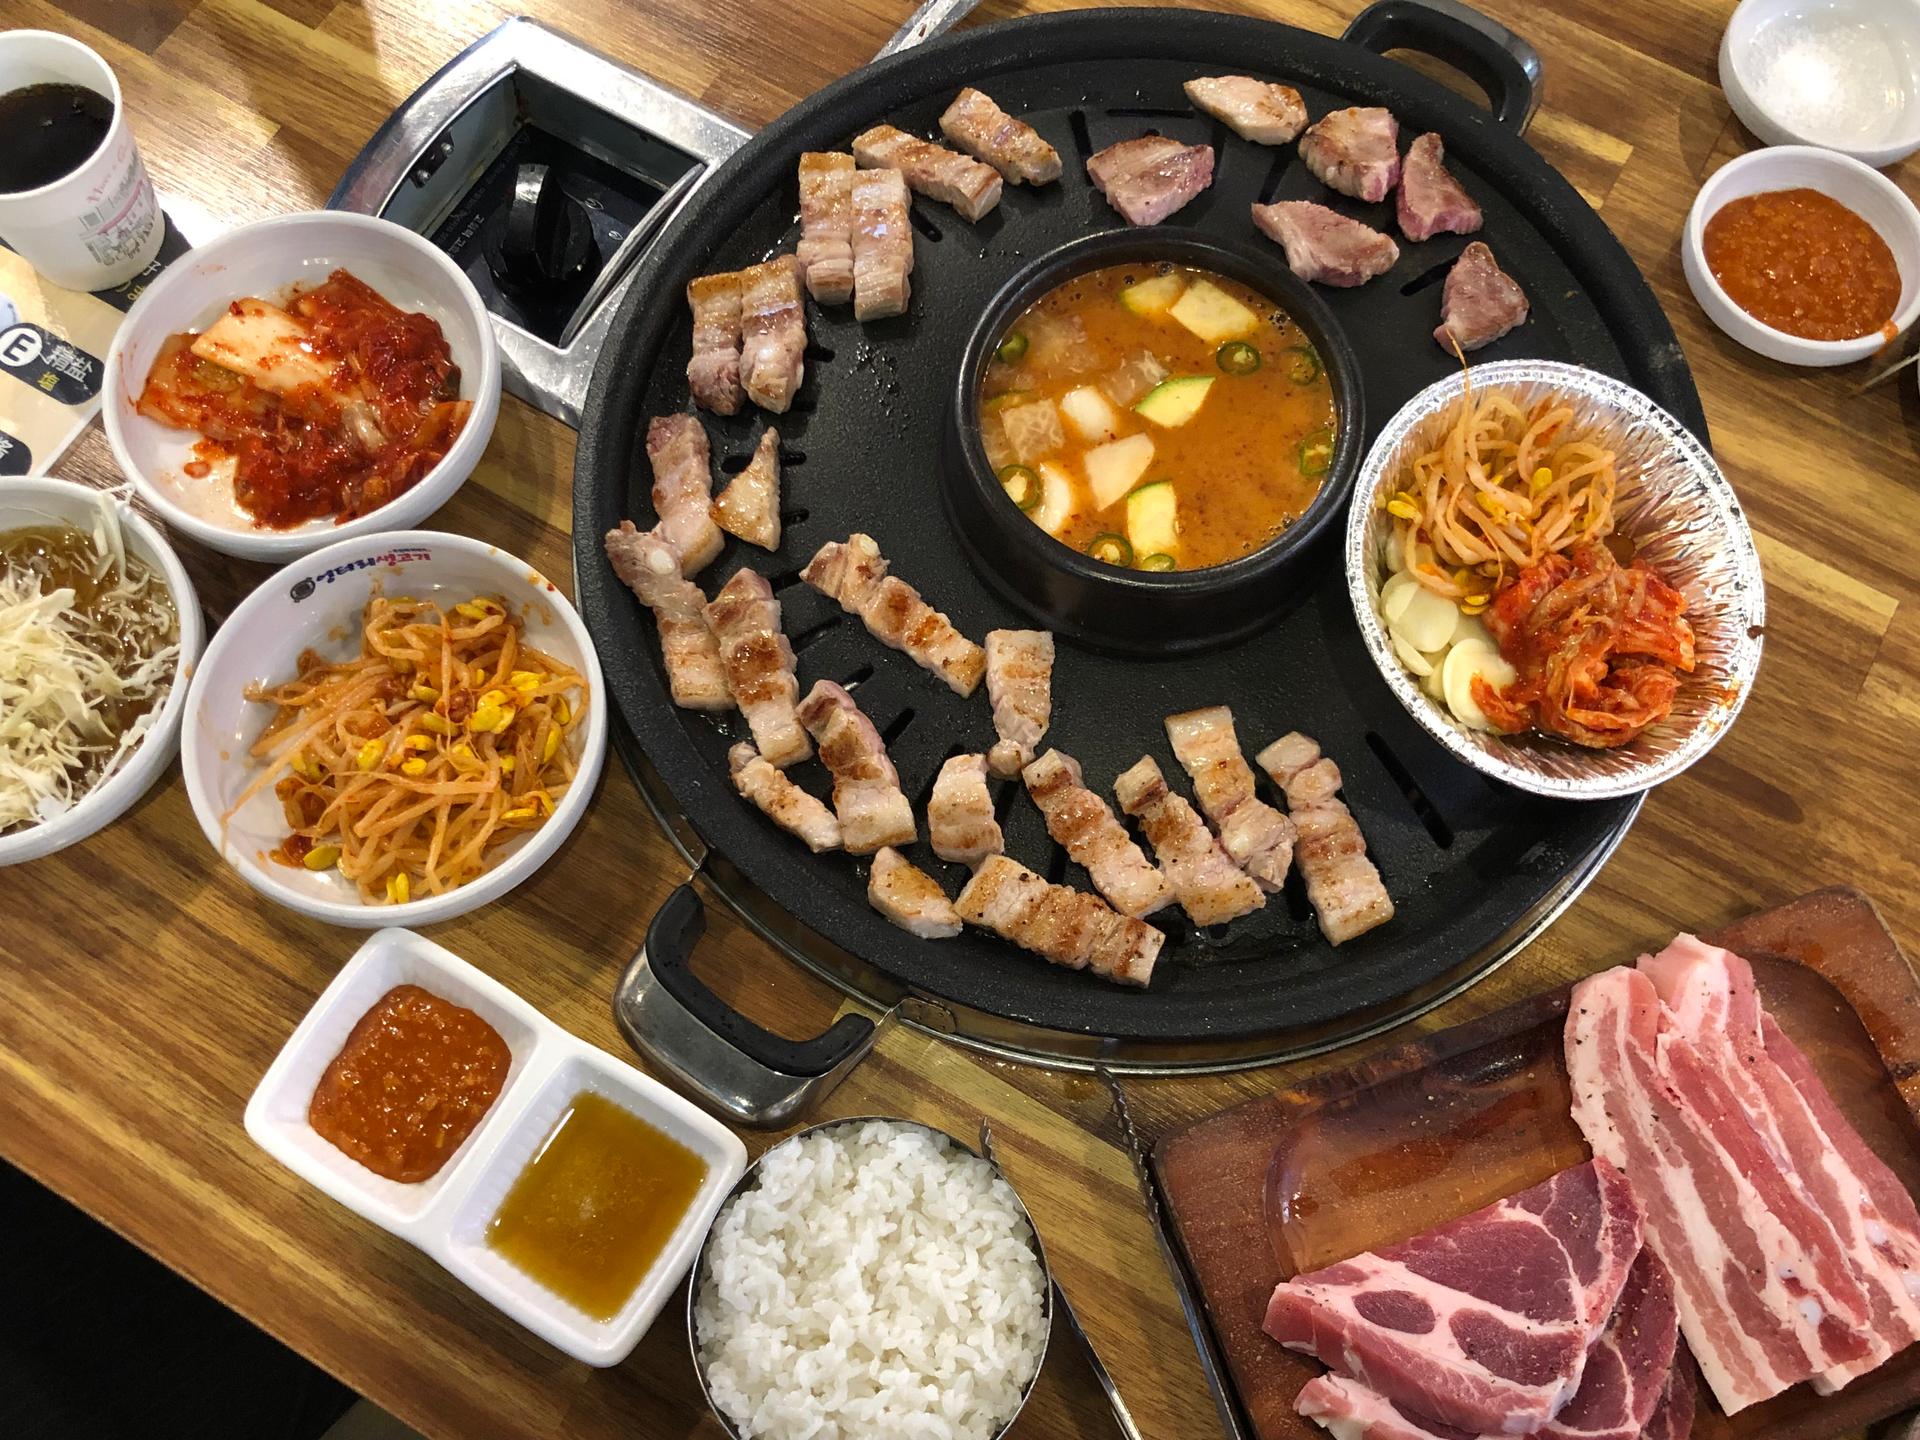 Plate of sizzling 삼겹살 (pork belly) and other dishes on the table at 엉터리생고기 홍대점 in Korea.